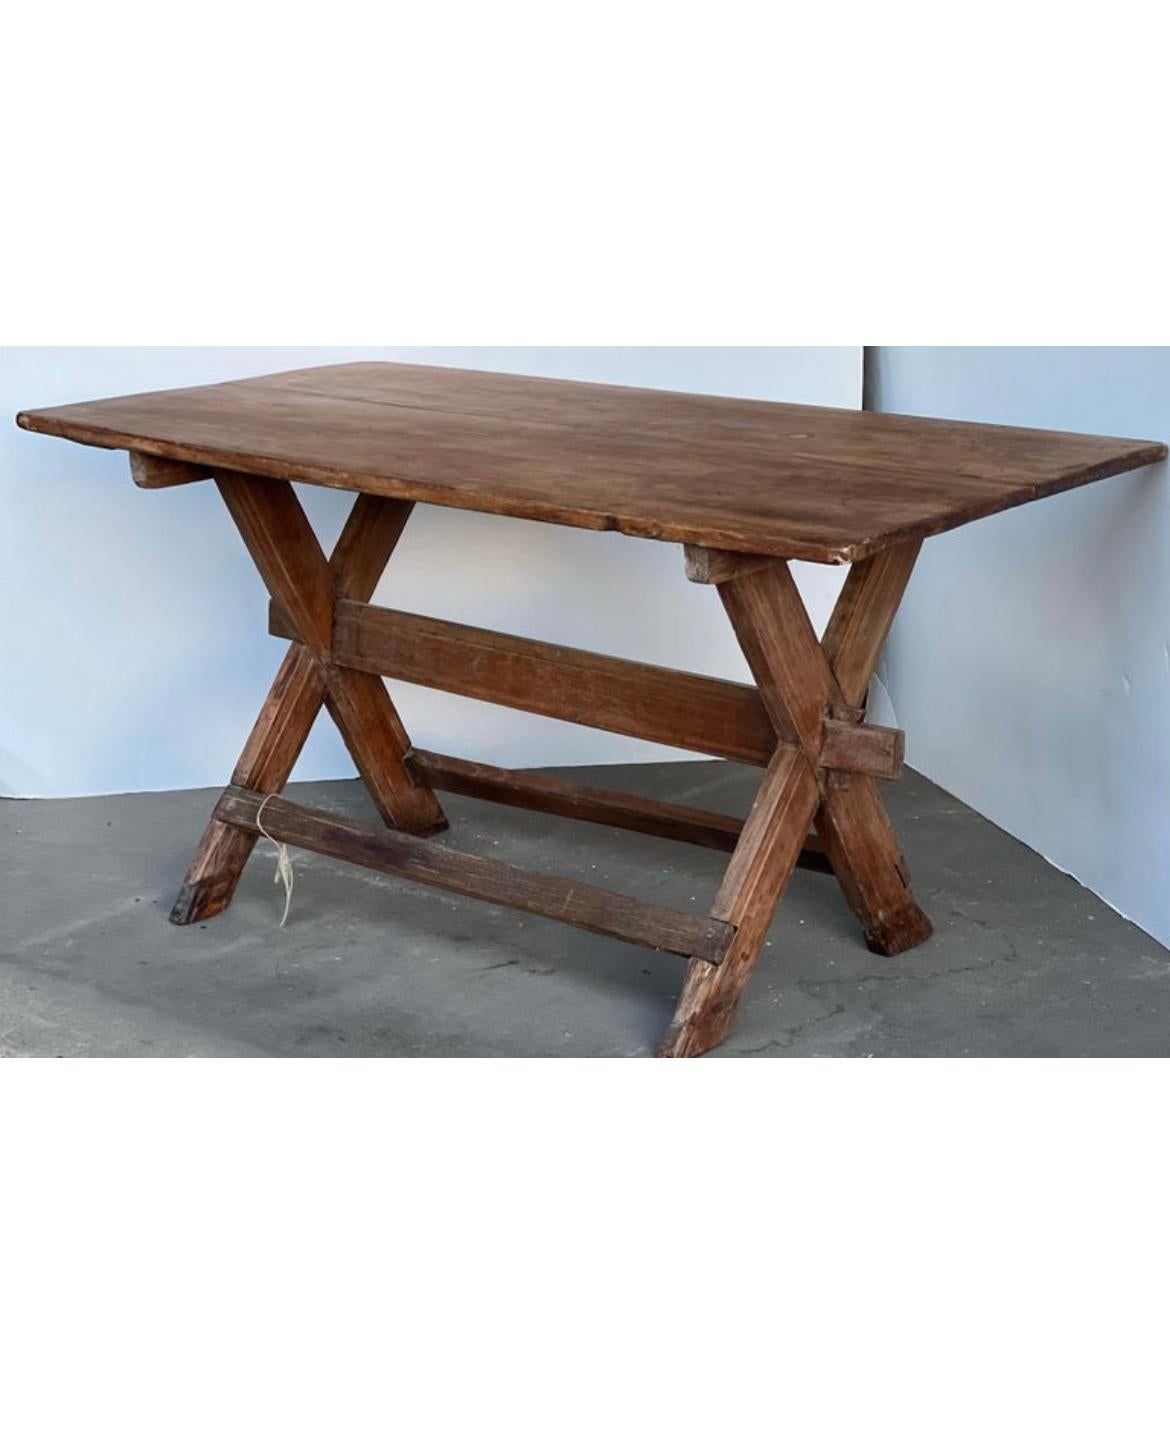 Here is a beautiful cross leg table that features a stretcher and excellent patina and more. This table is perfect for any wabi sabi, traditional, farmhouse or more design space. Perfect for a console table, desk or small kitchen area. This unique